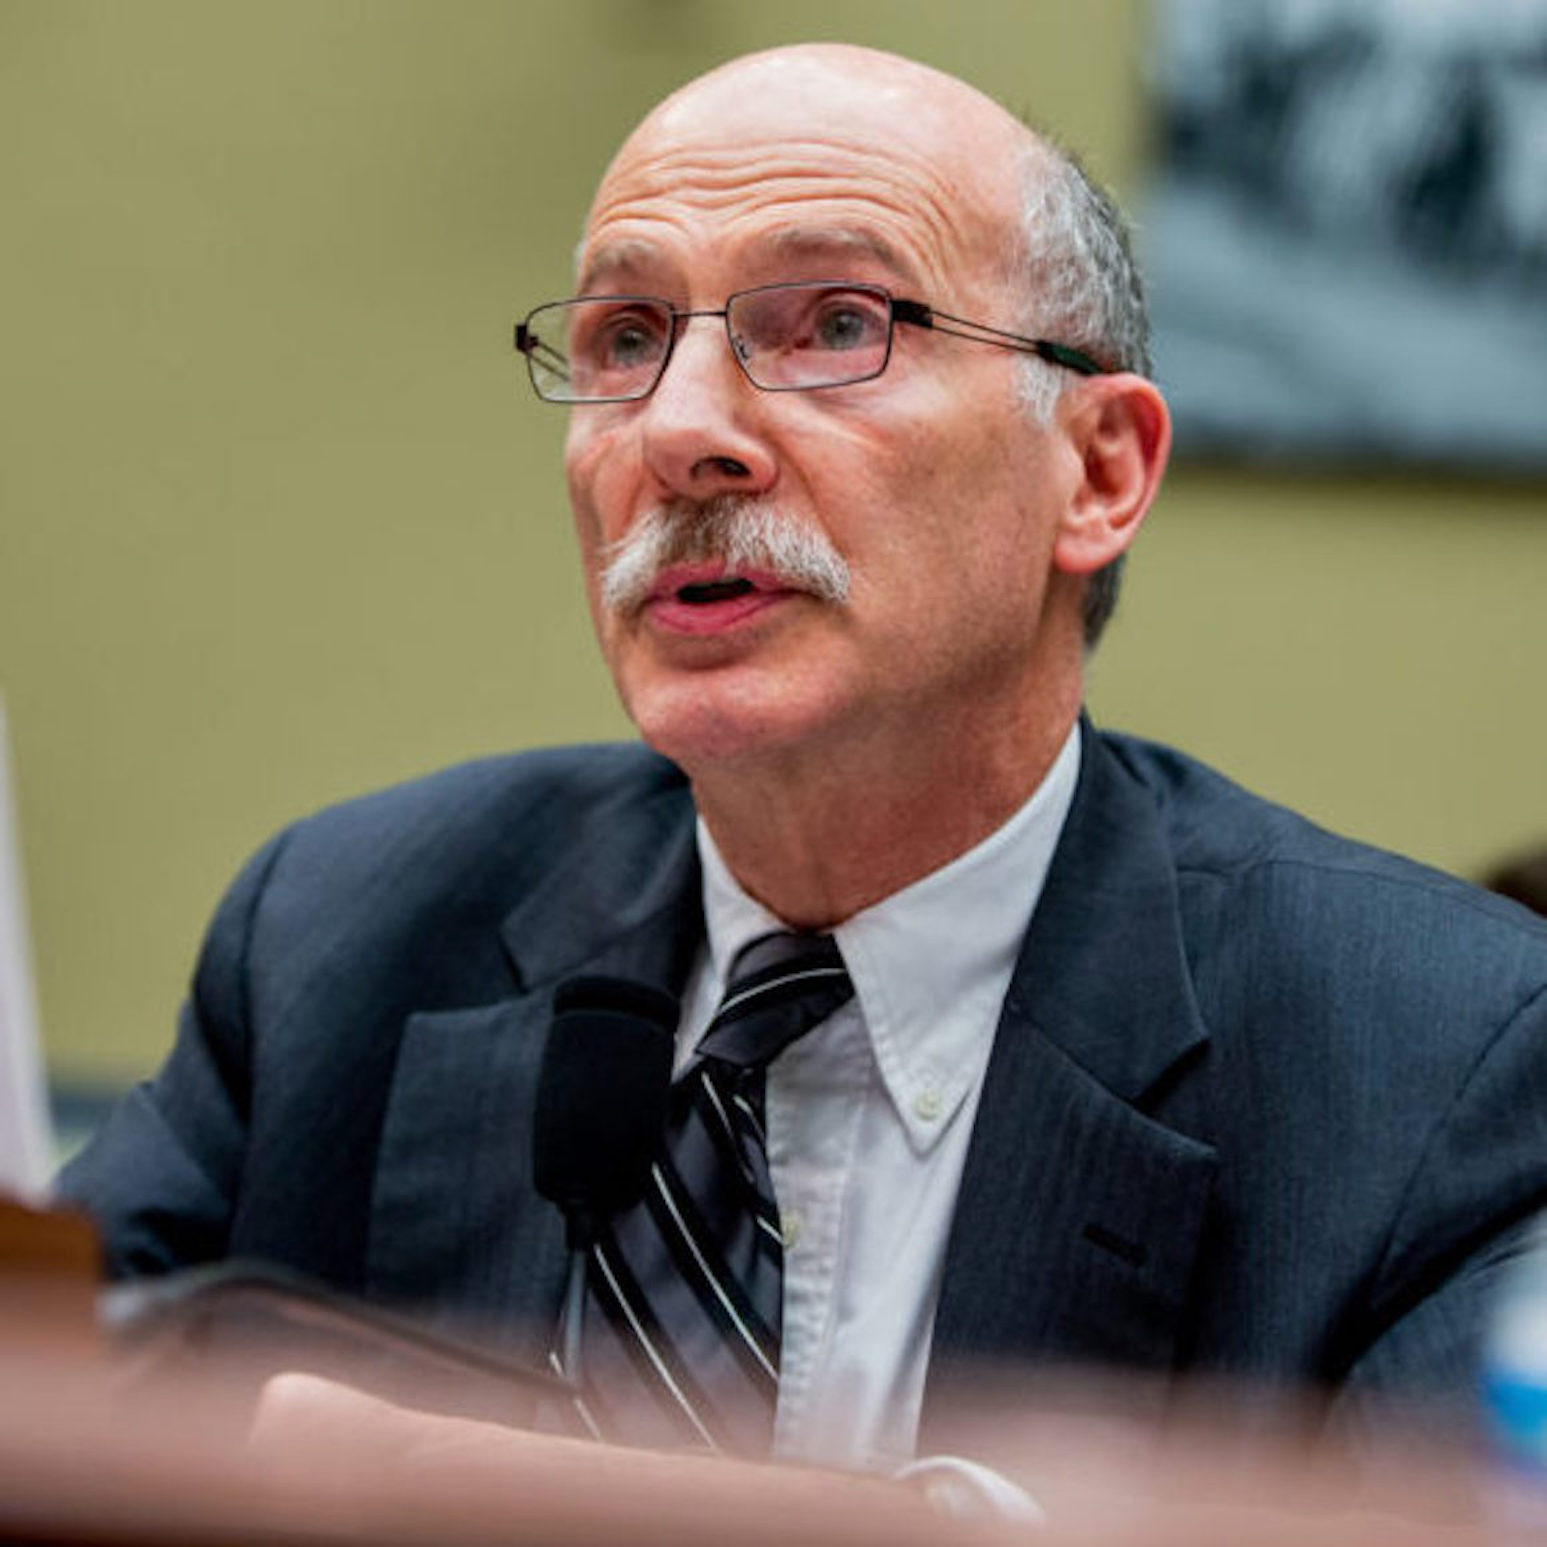 D.C. Council Chair Phil Mendelson on the Mayor’s latest crime and policing bill